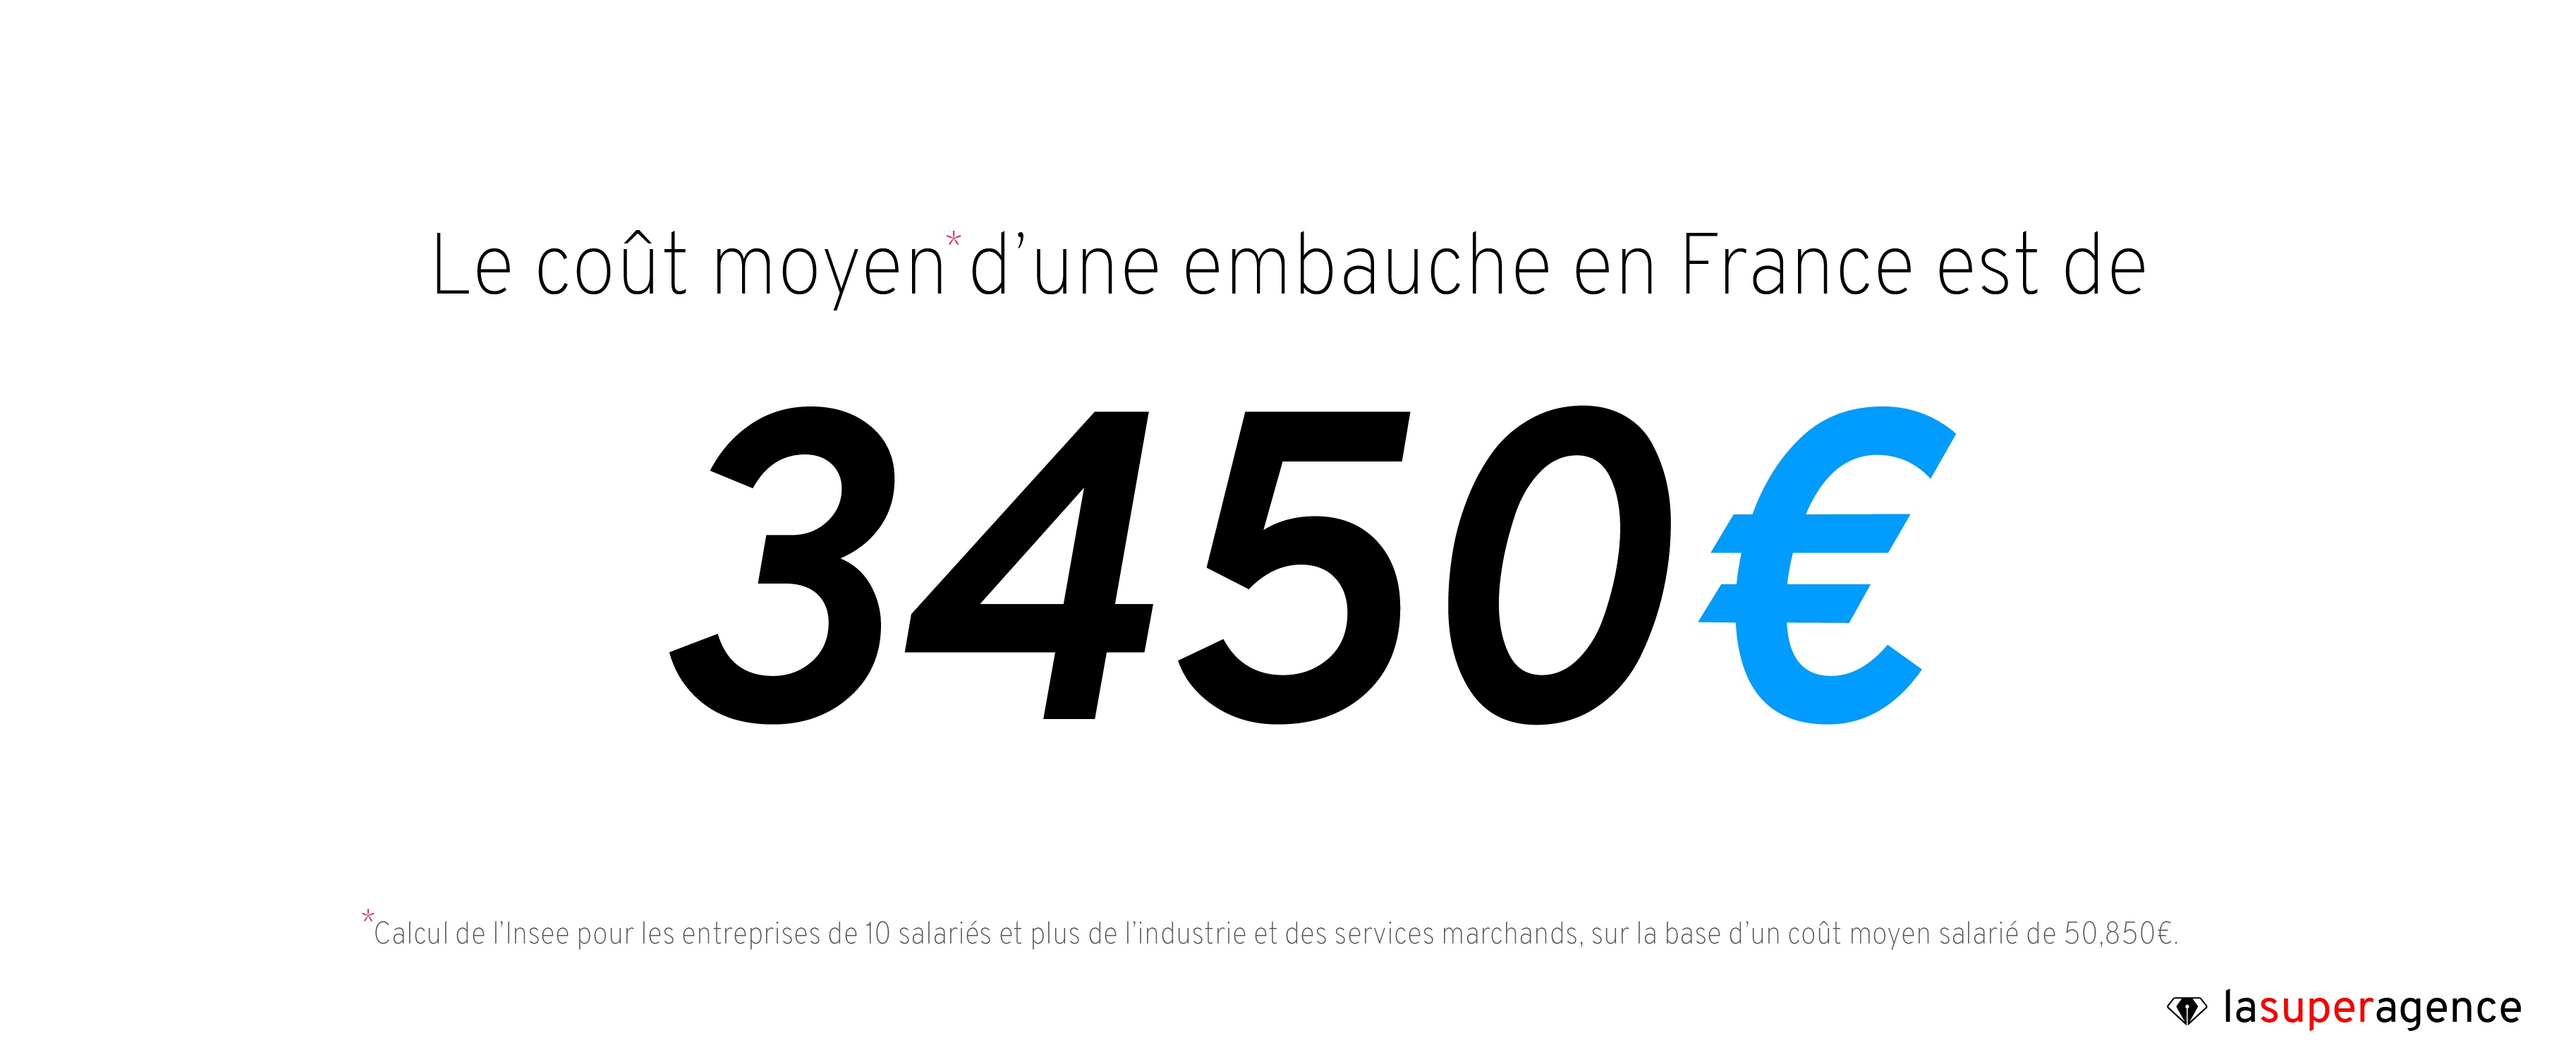 According to INSEE, the average cost of hiring is about 3450 euros